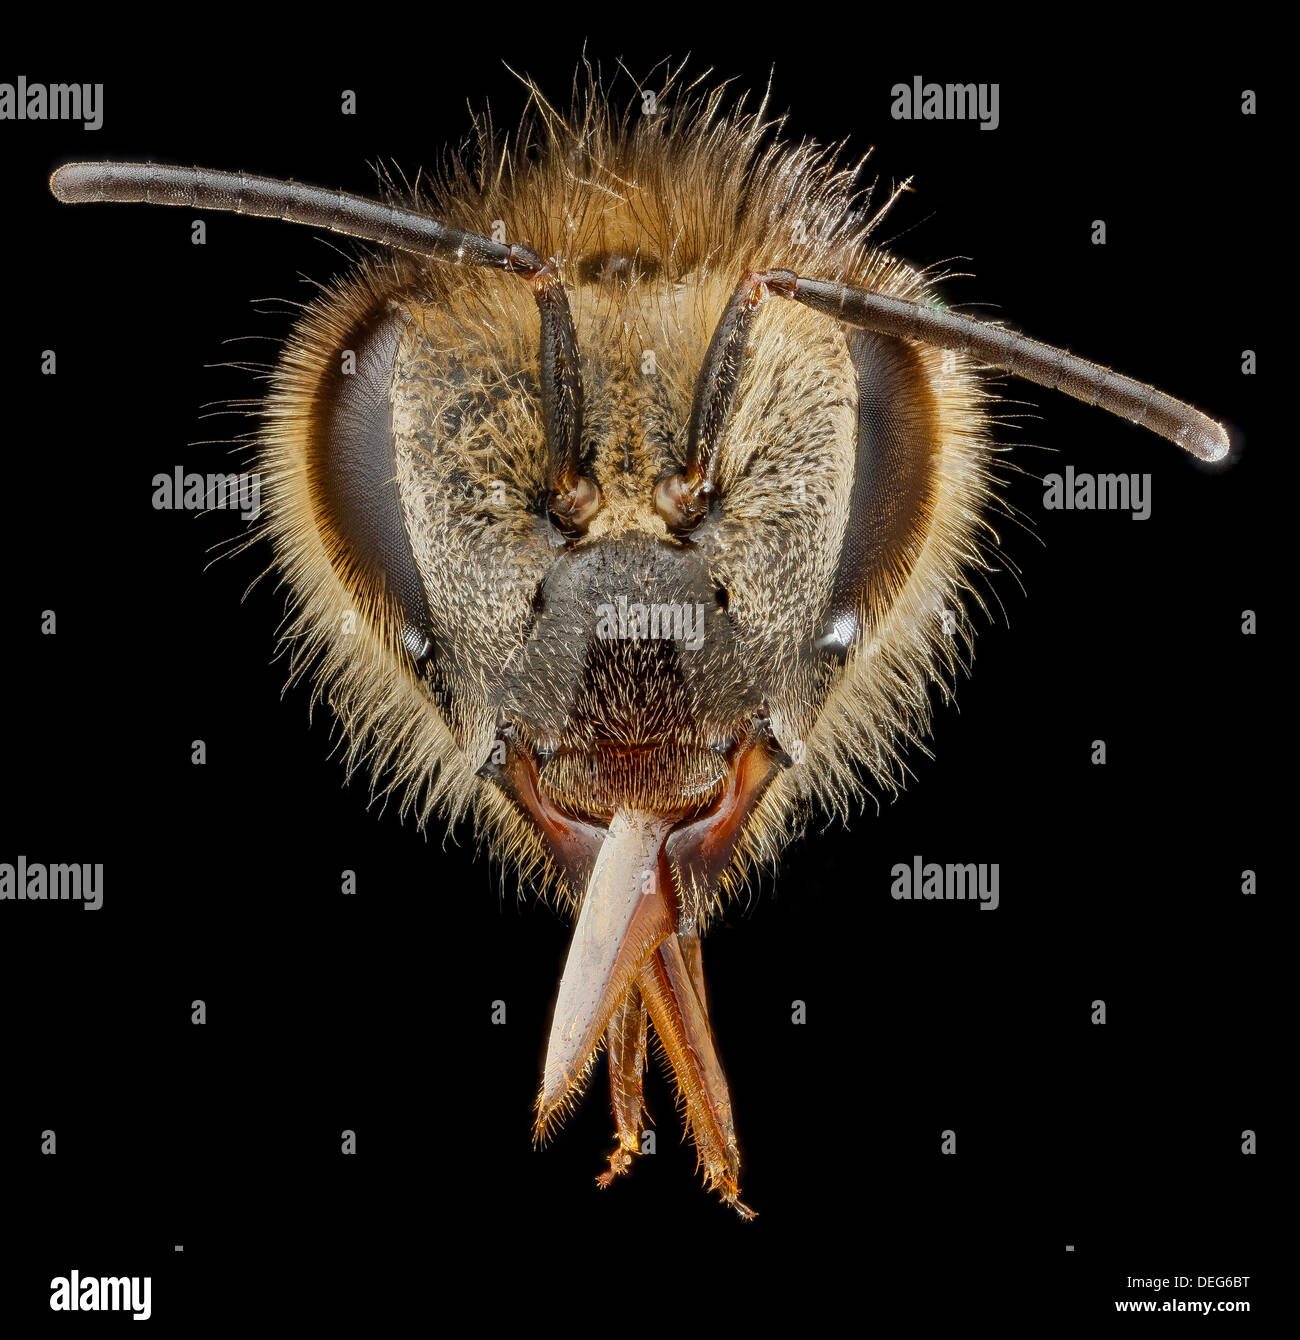 Macro view of a European honey bee face, Apis mellifera, note the hairs coming off the compound eyes a distinctive honey bee trait compared to native bees. Stock Photo